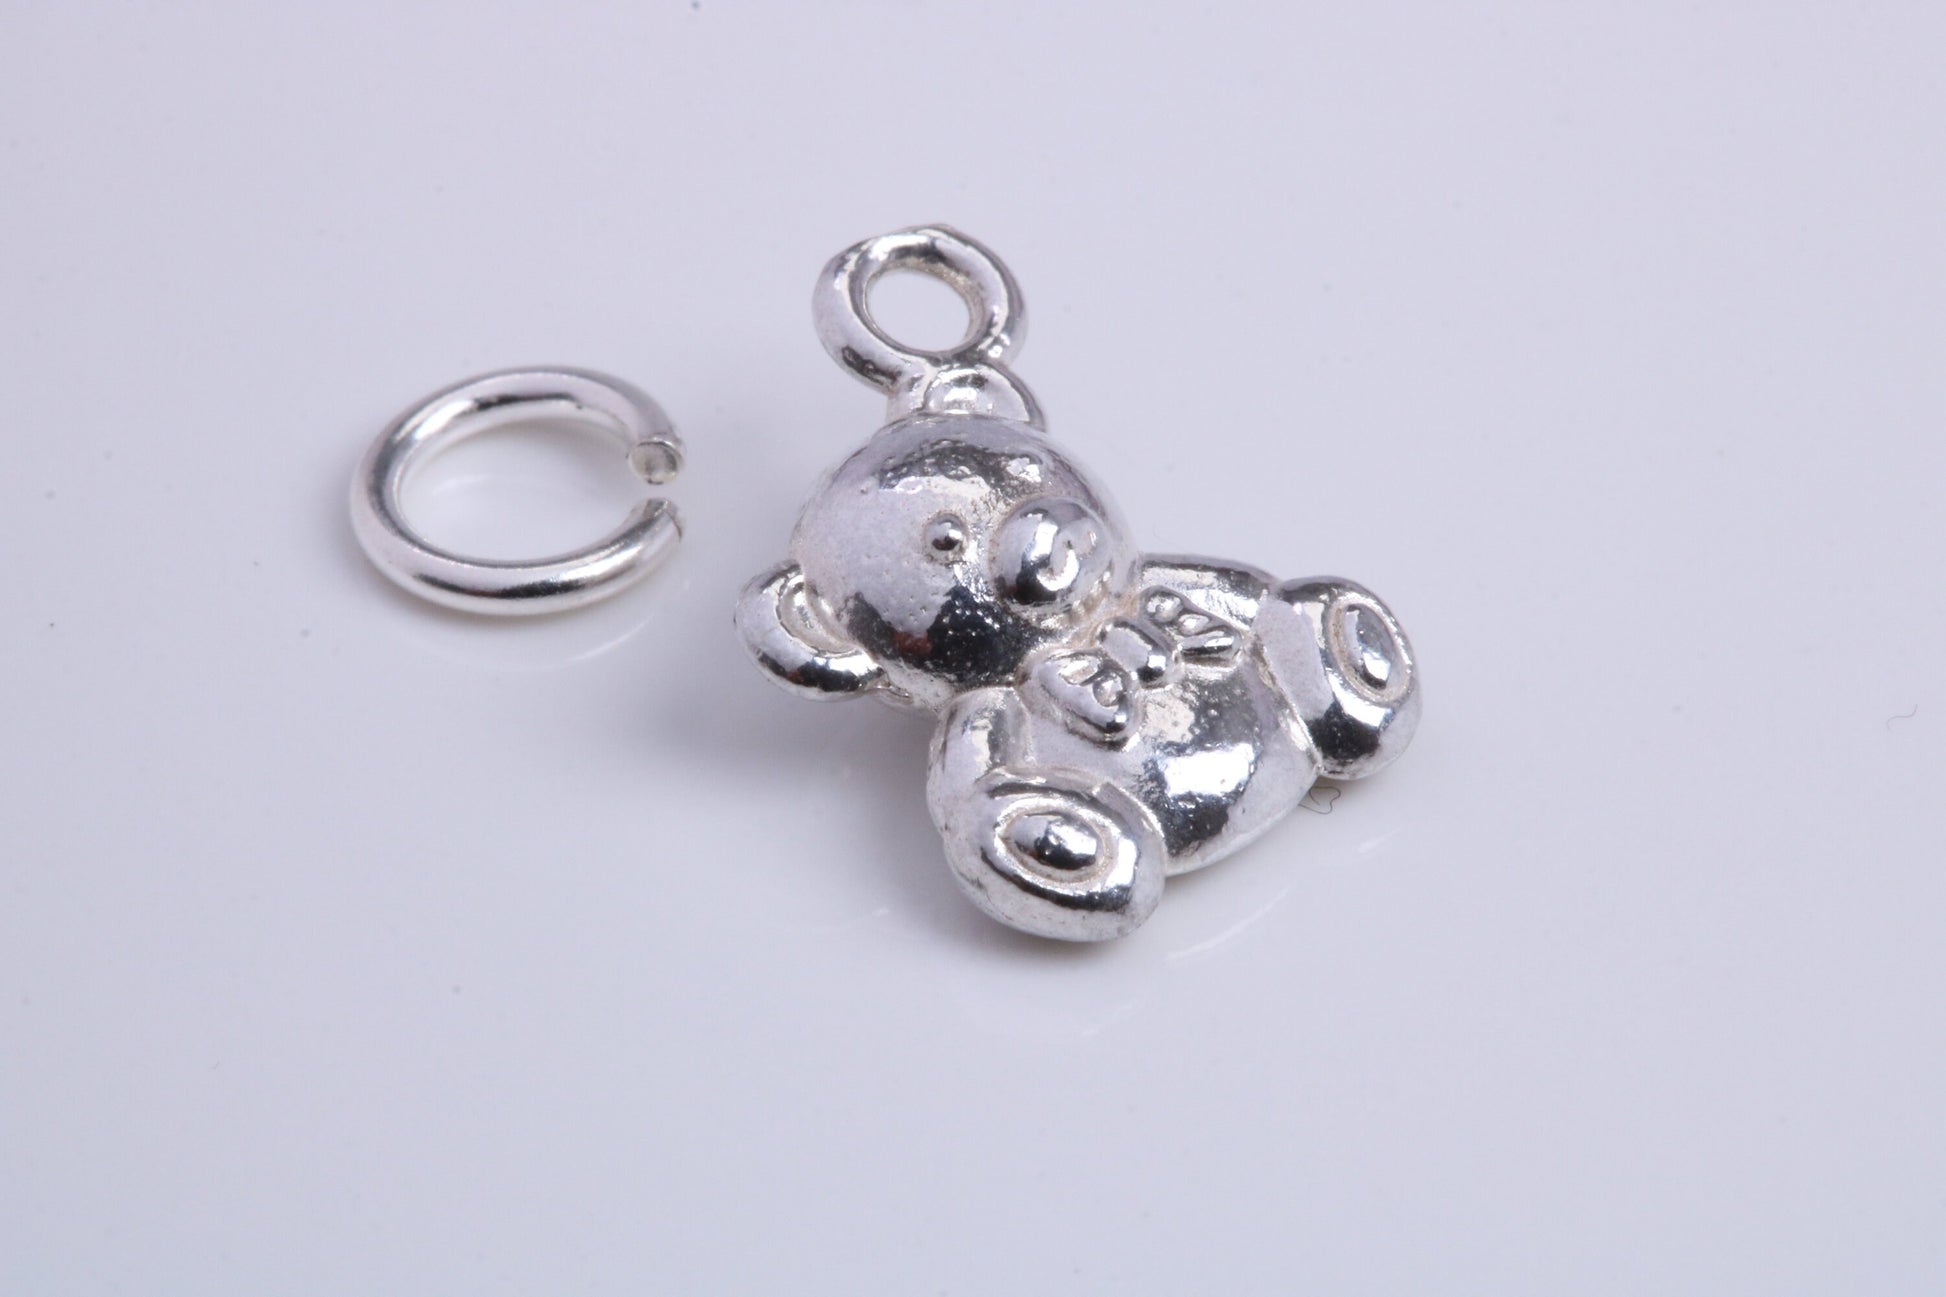 Teddy Bear Charm, Traditional Charm, Made from Solid 925 Grade Sterling Silver, Complete with Attachment Link